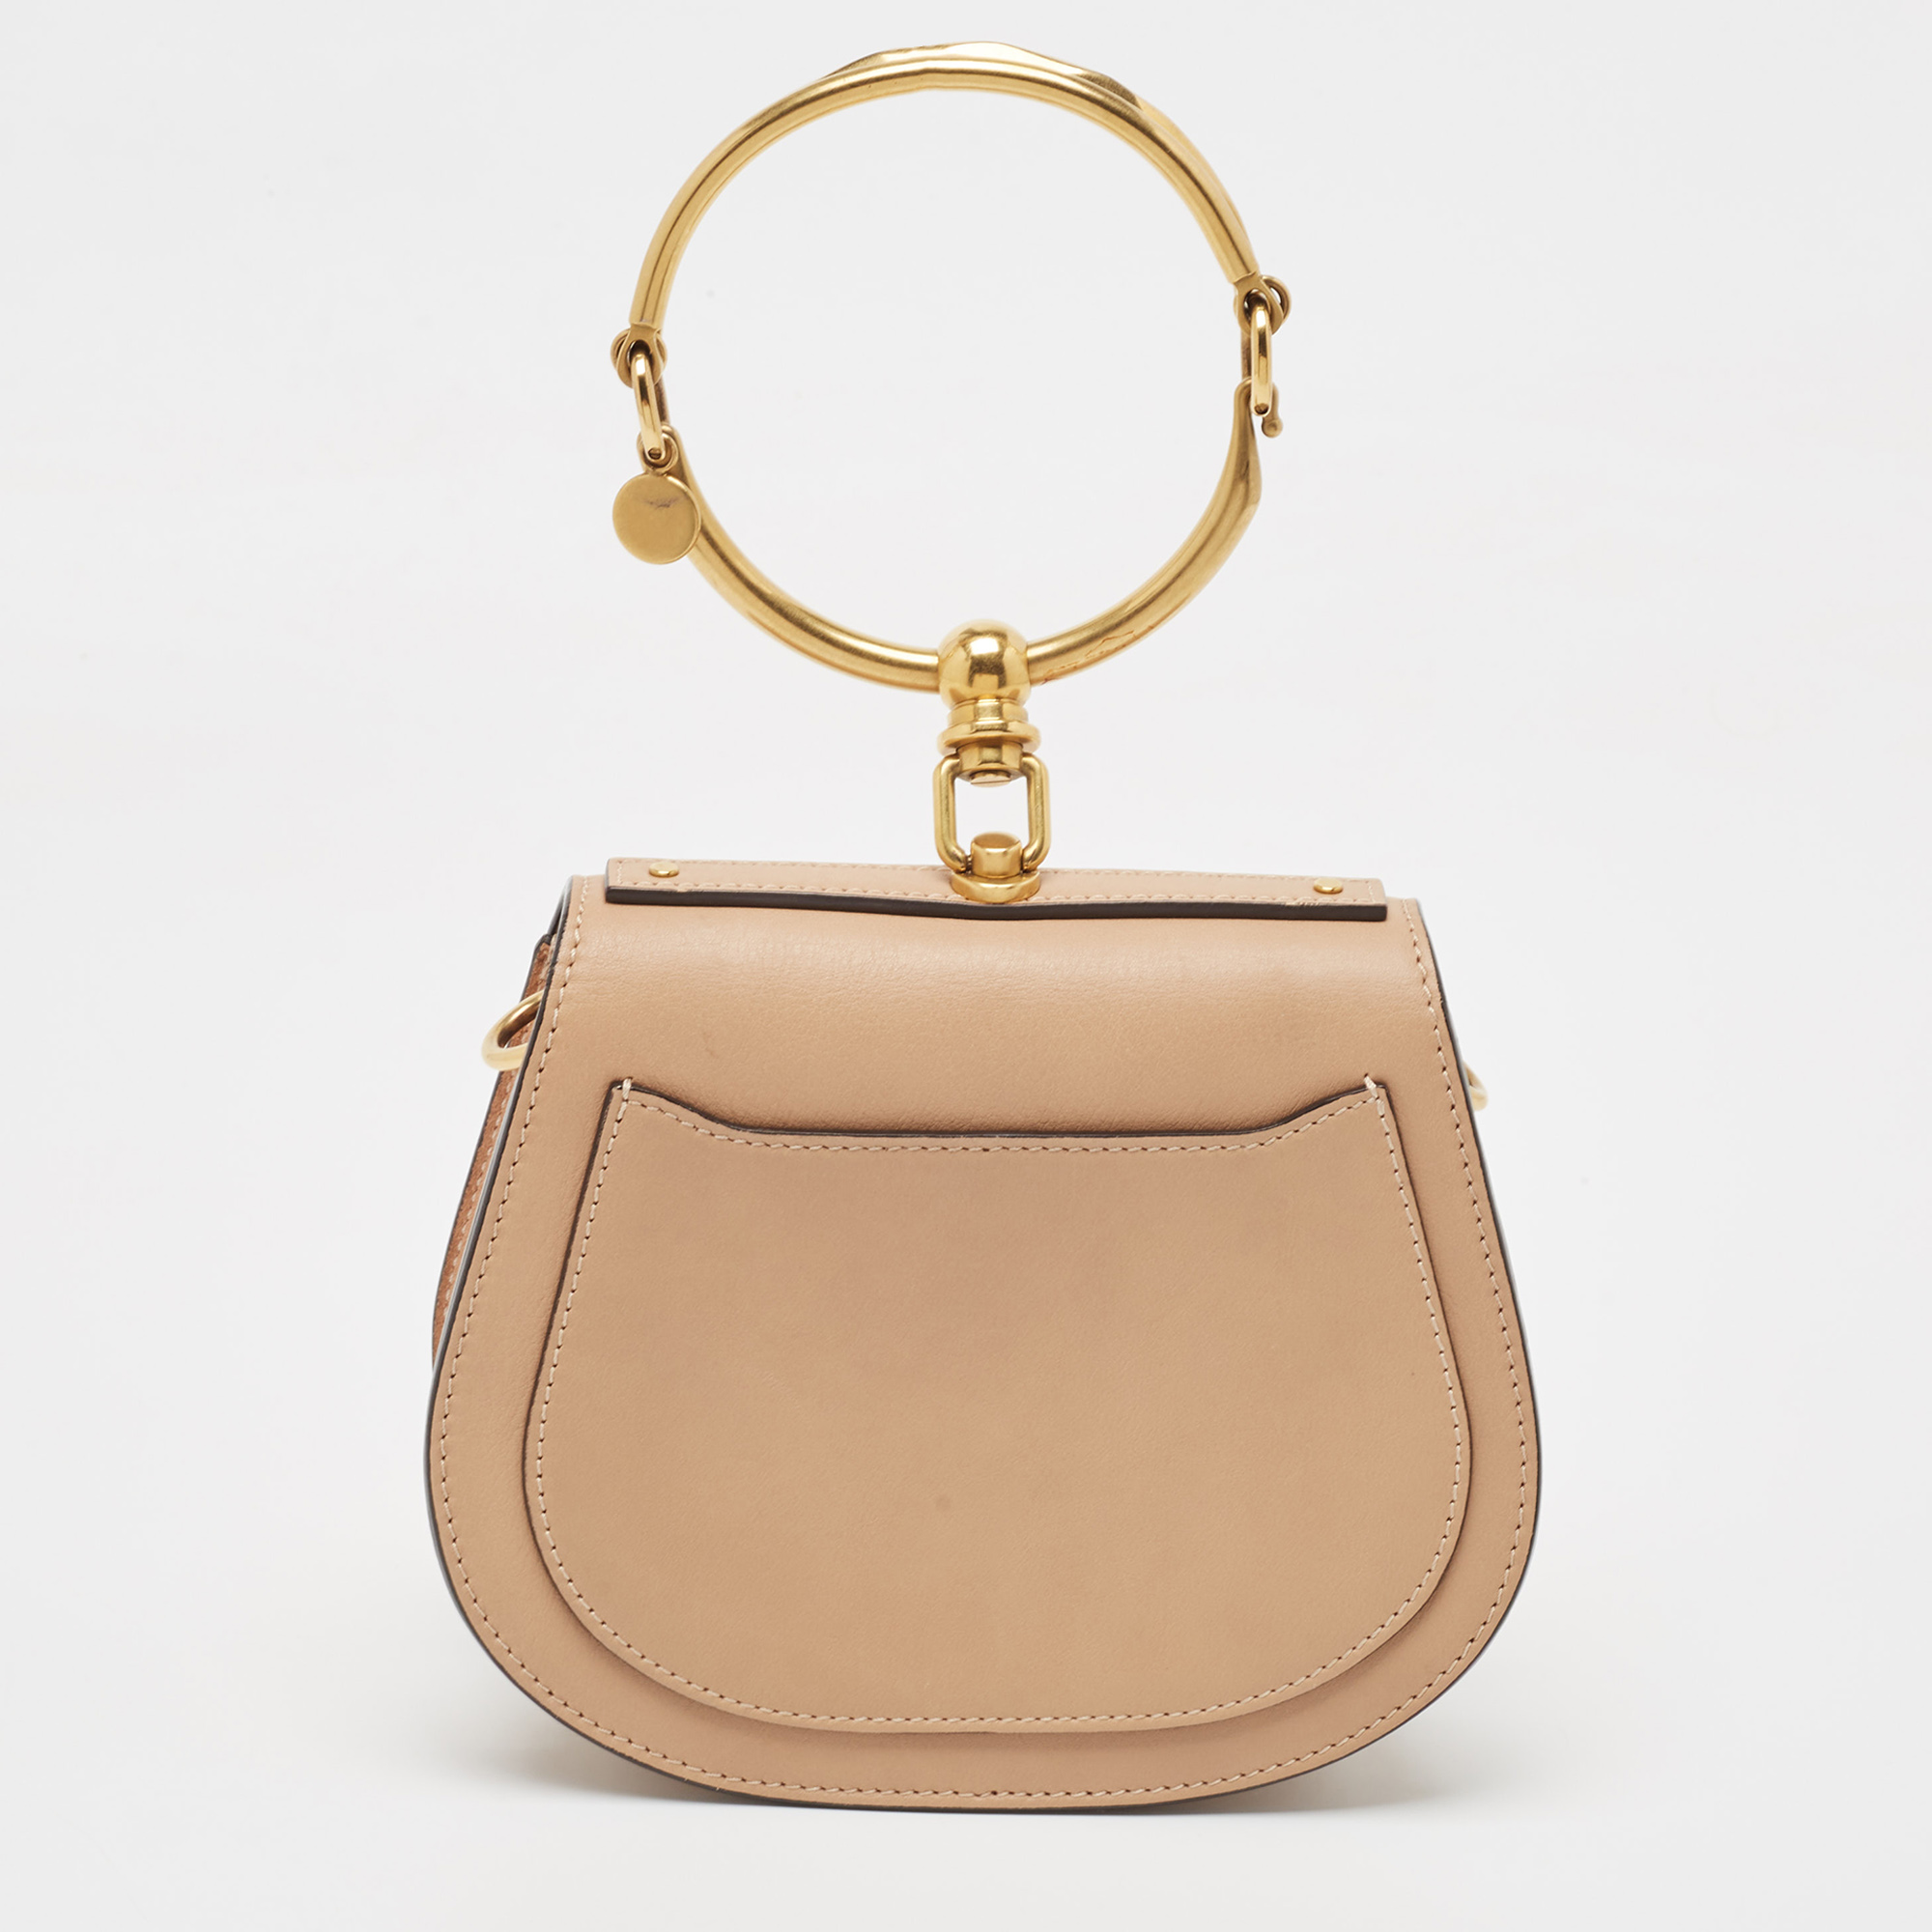 Chloe Beige Leather And Suede Small Nile Bracelet Crossbody Bag